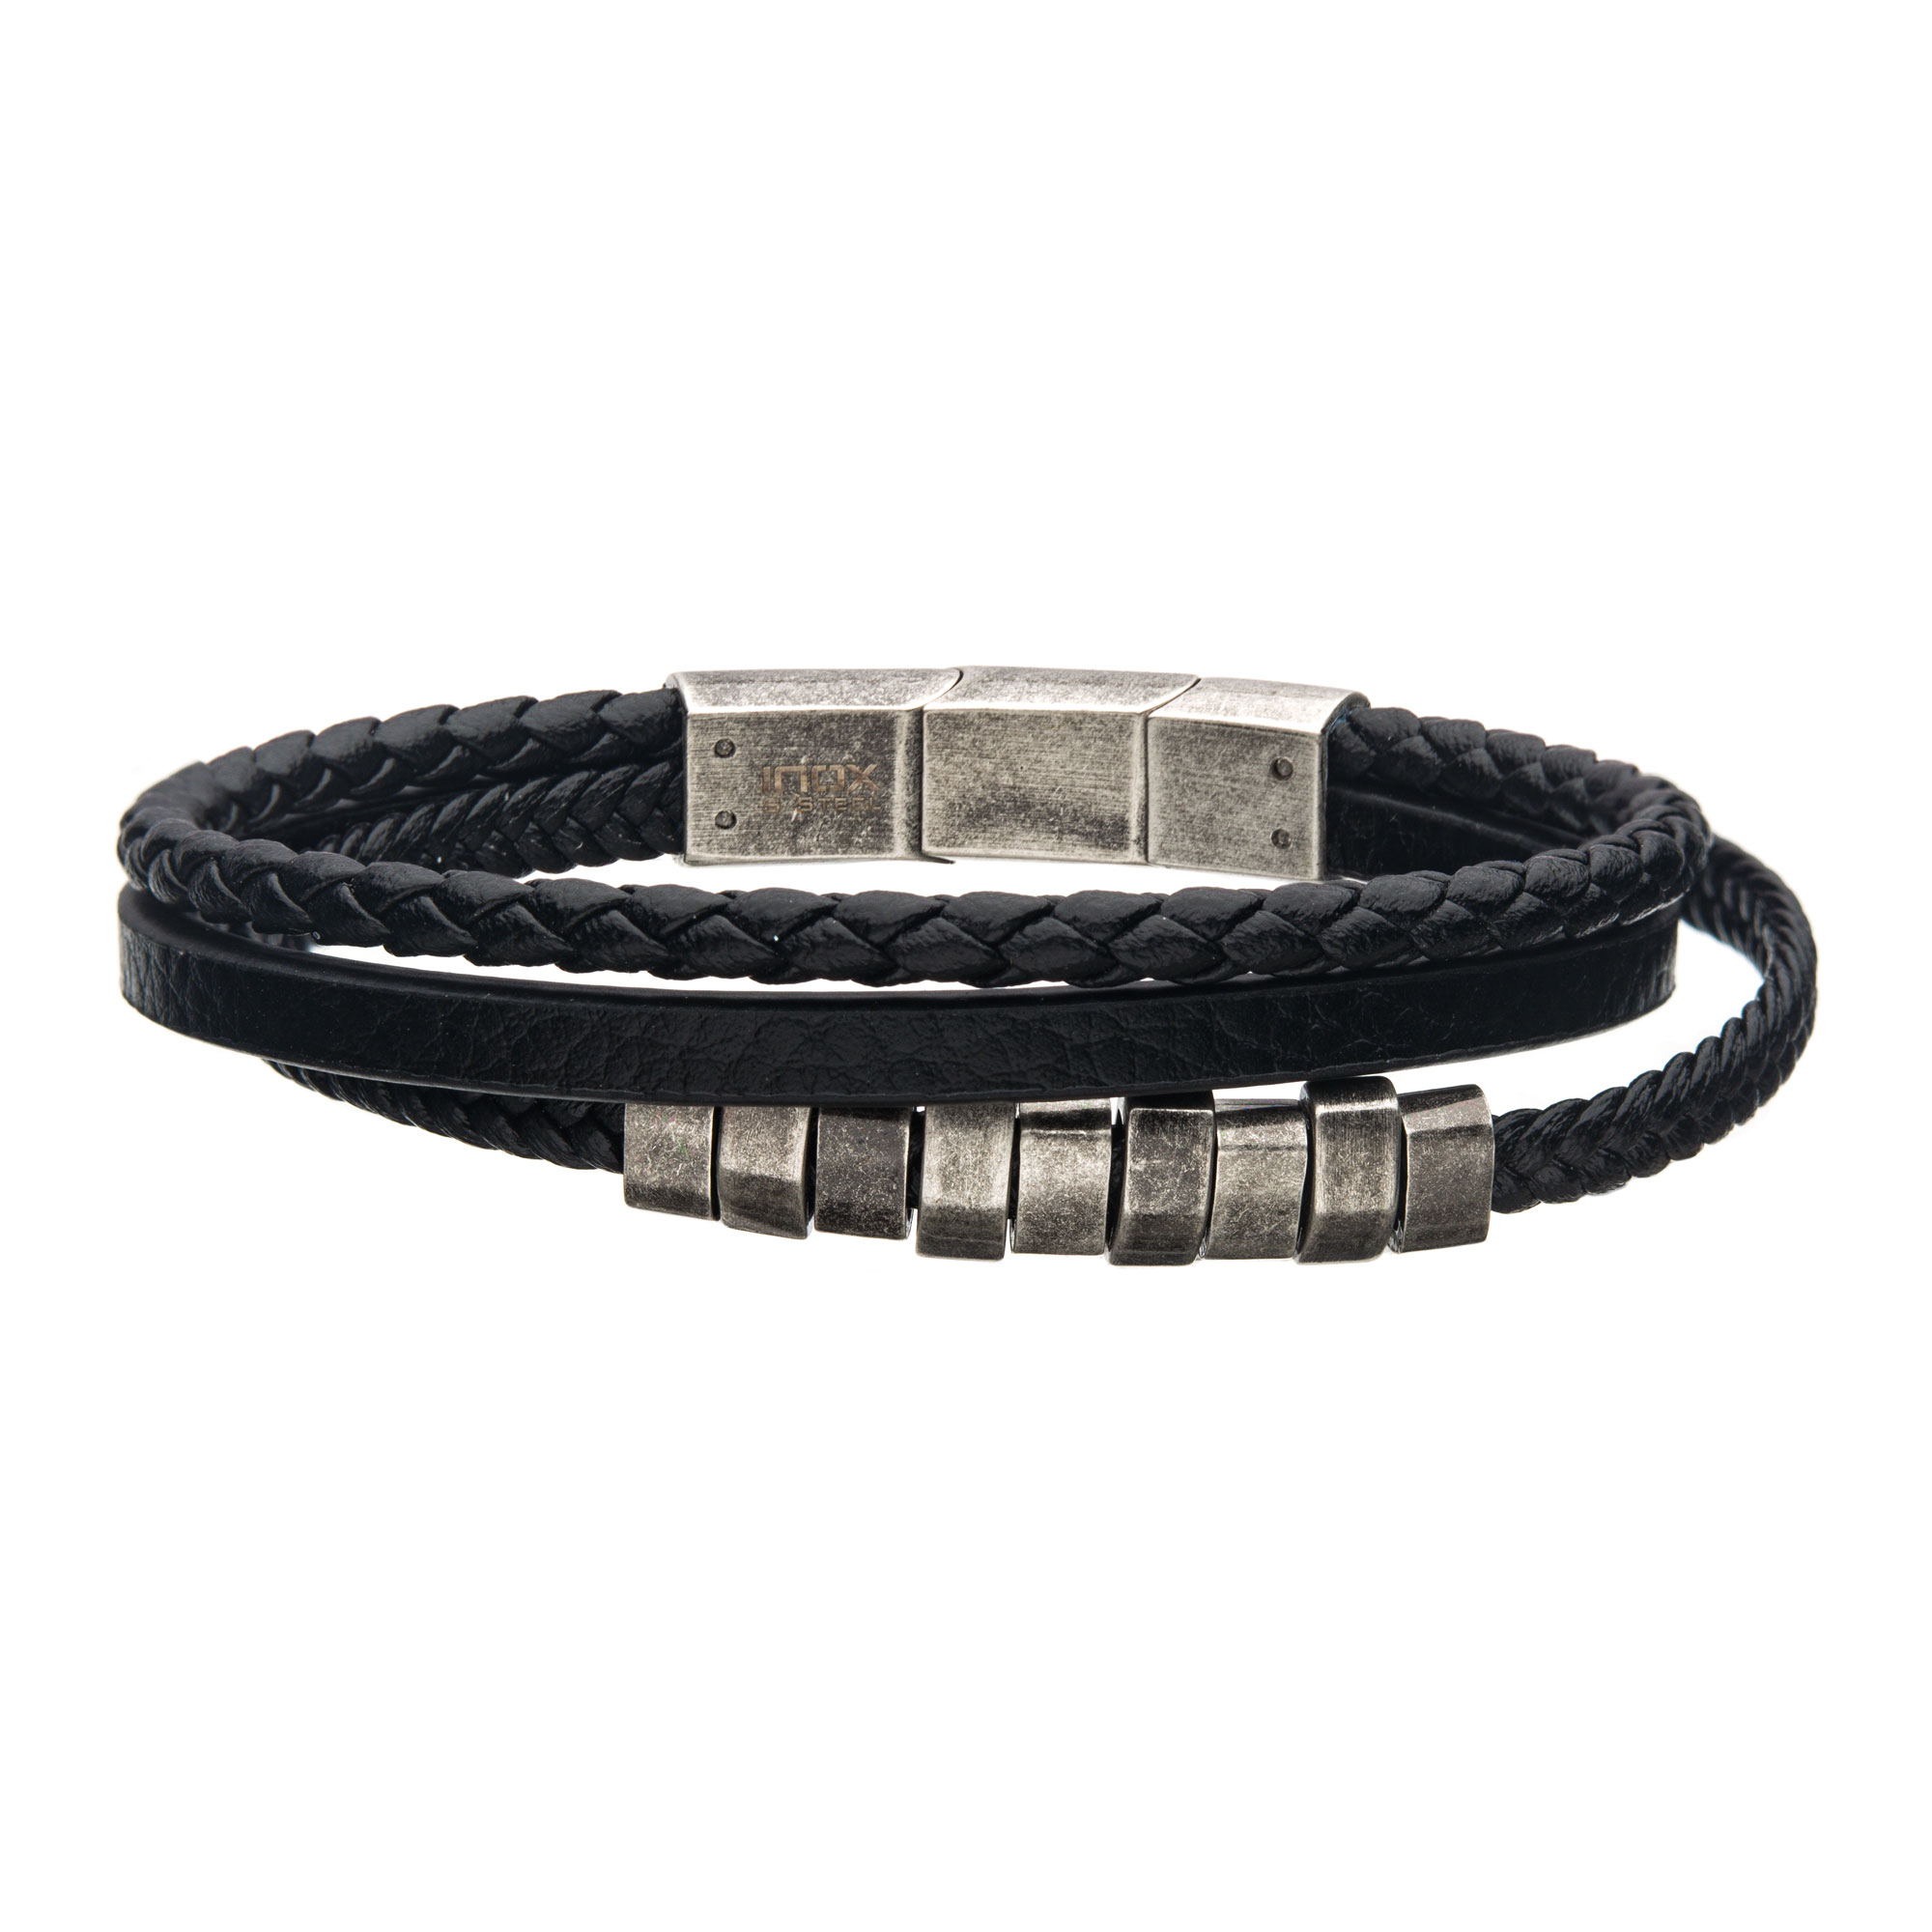 Black Braided Multi Leather with Antiqued Steel Beads Bracelet Enchanted Jewelry Plainfield, CT